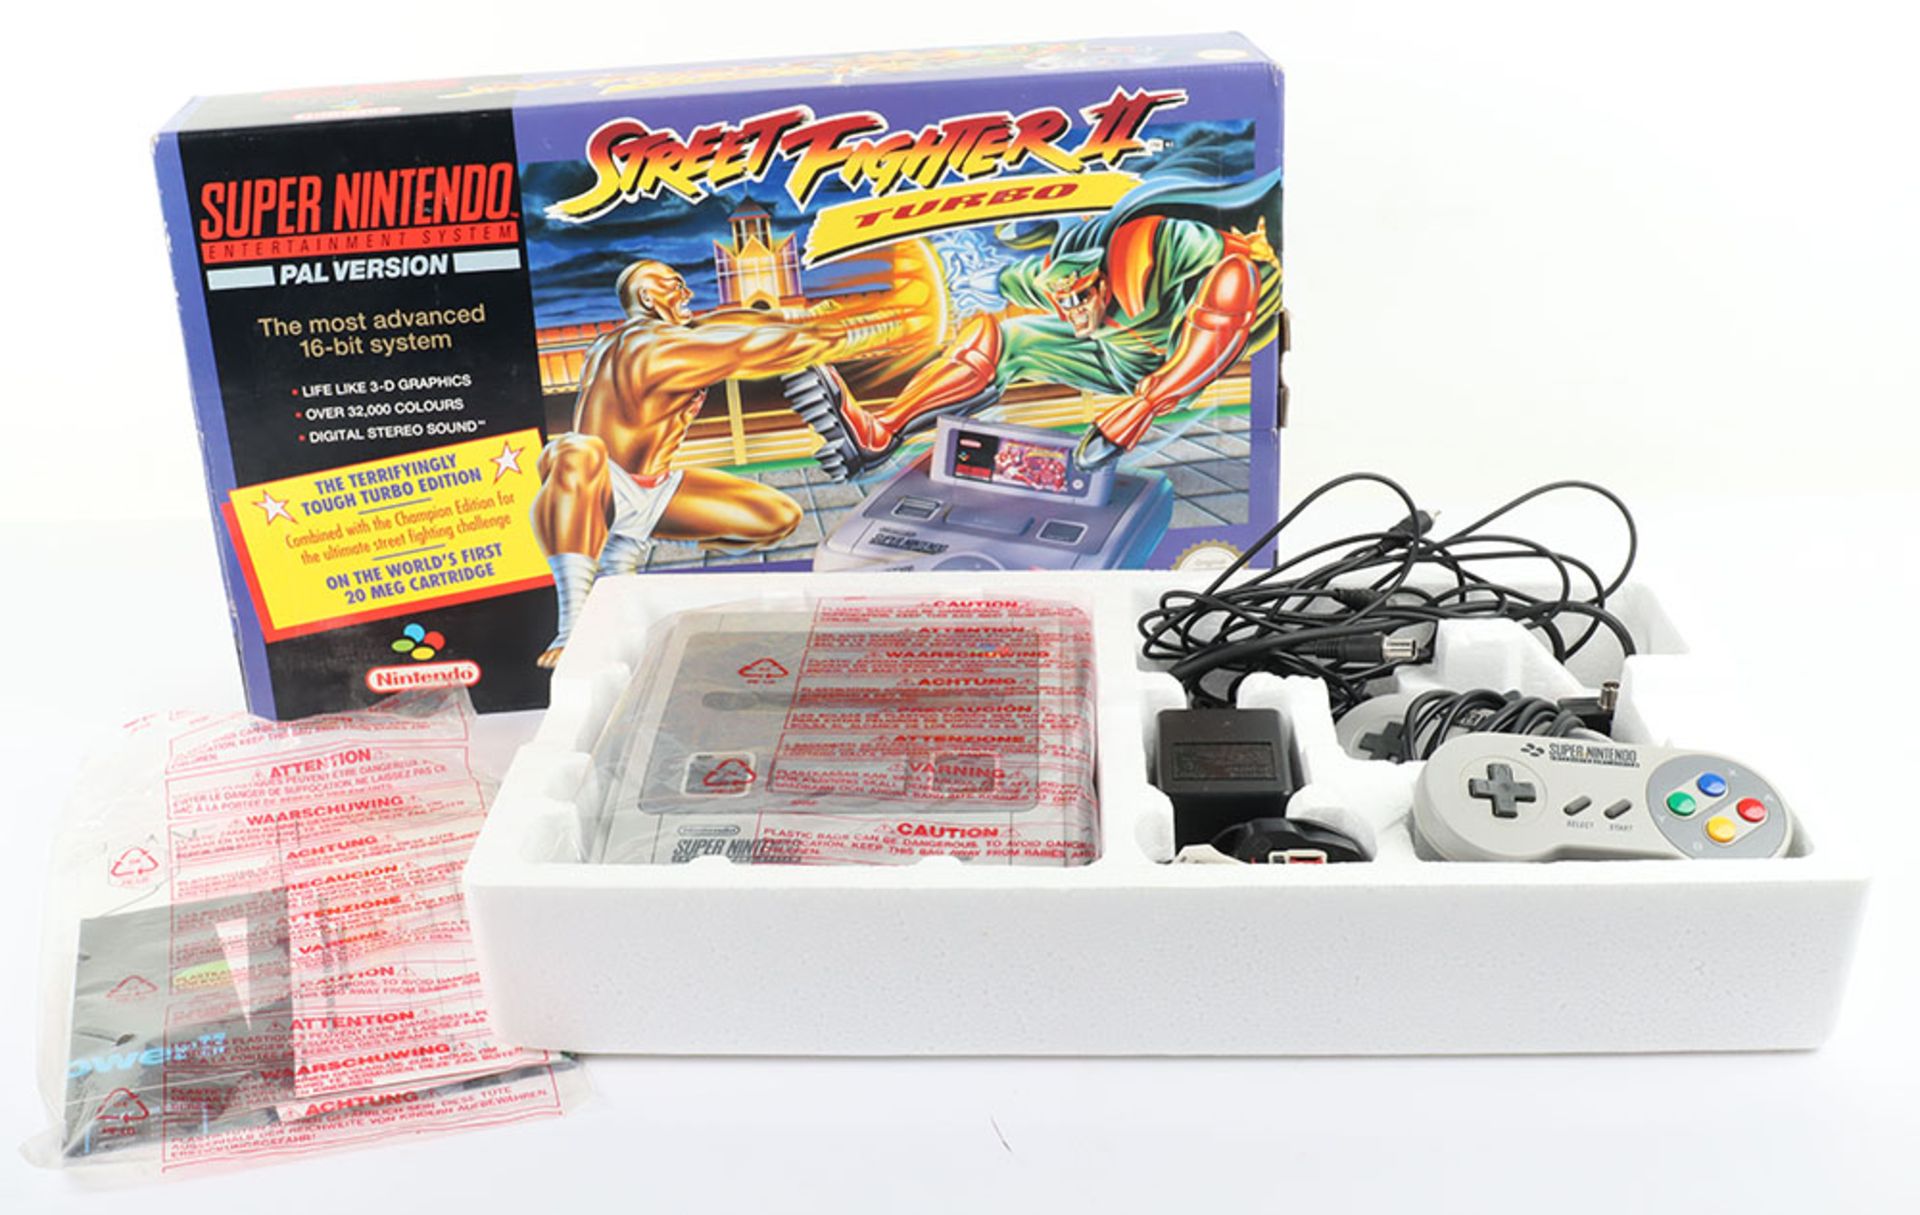 Super Nintendo Street Fighter 2 Turbo edition boxed - Image 10 of 11